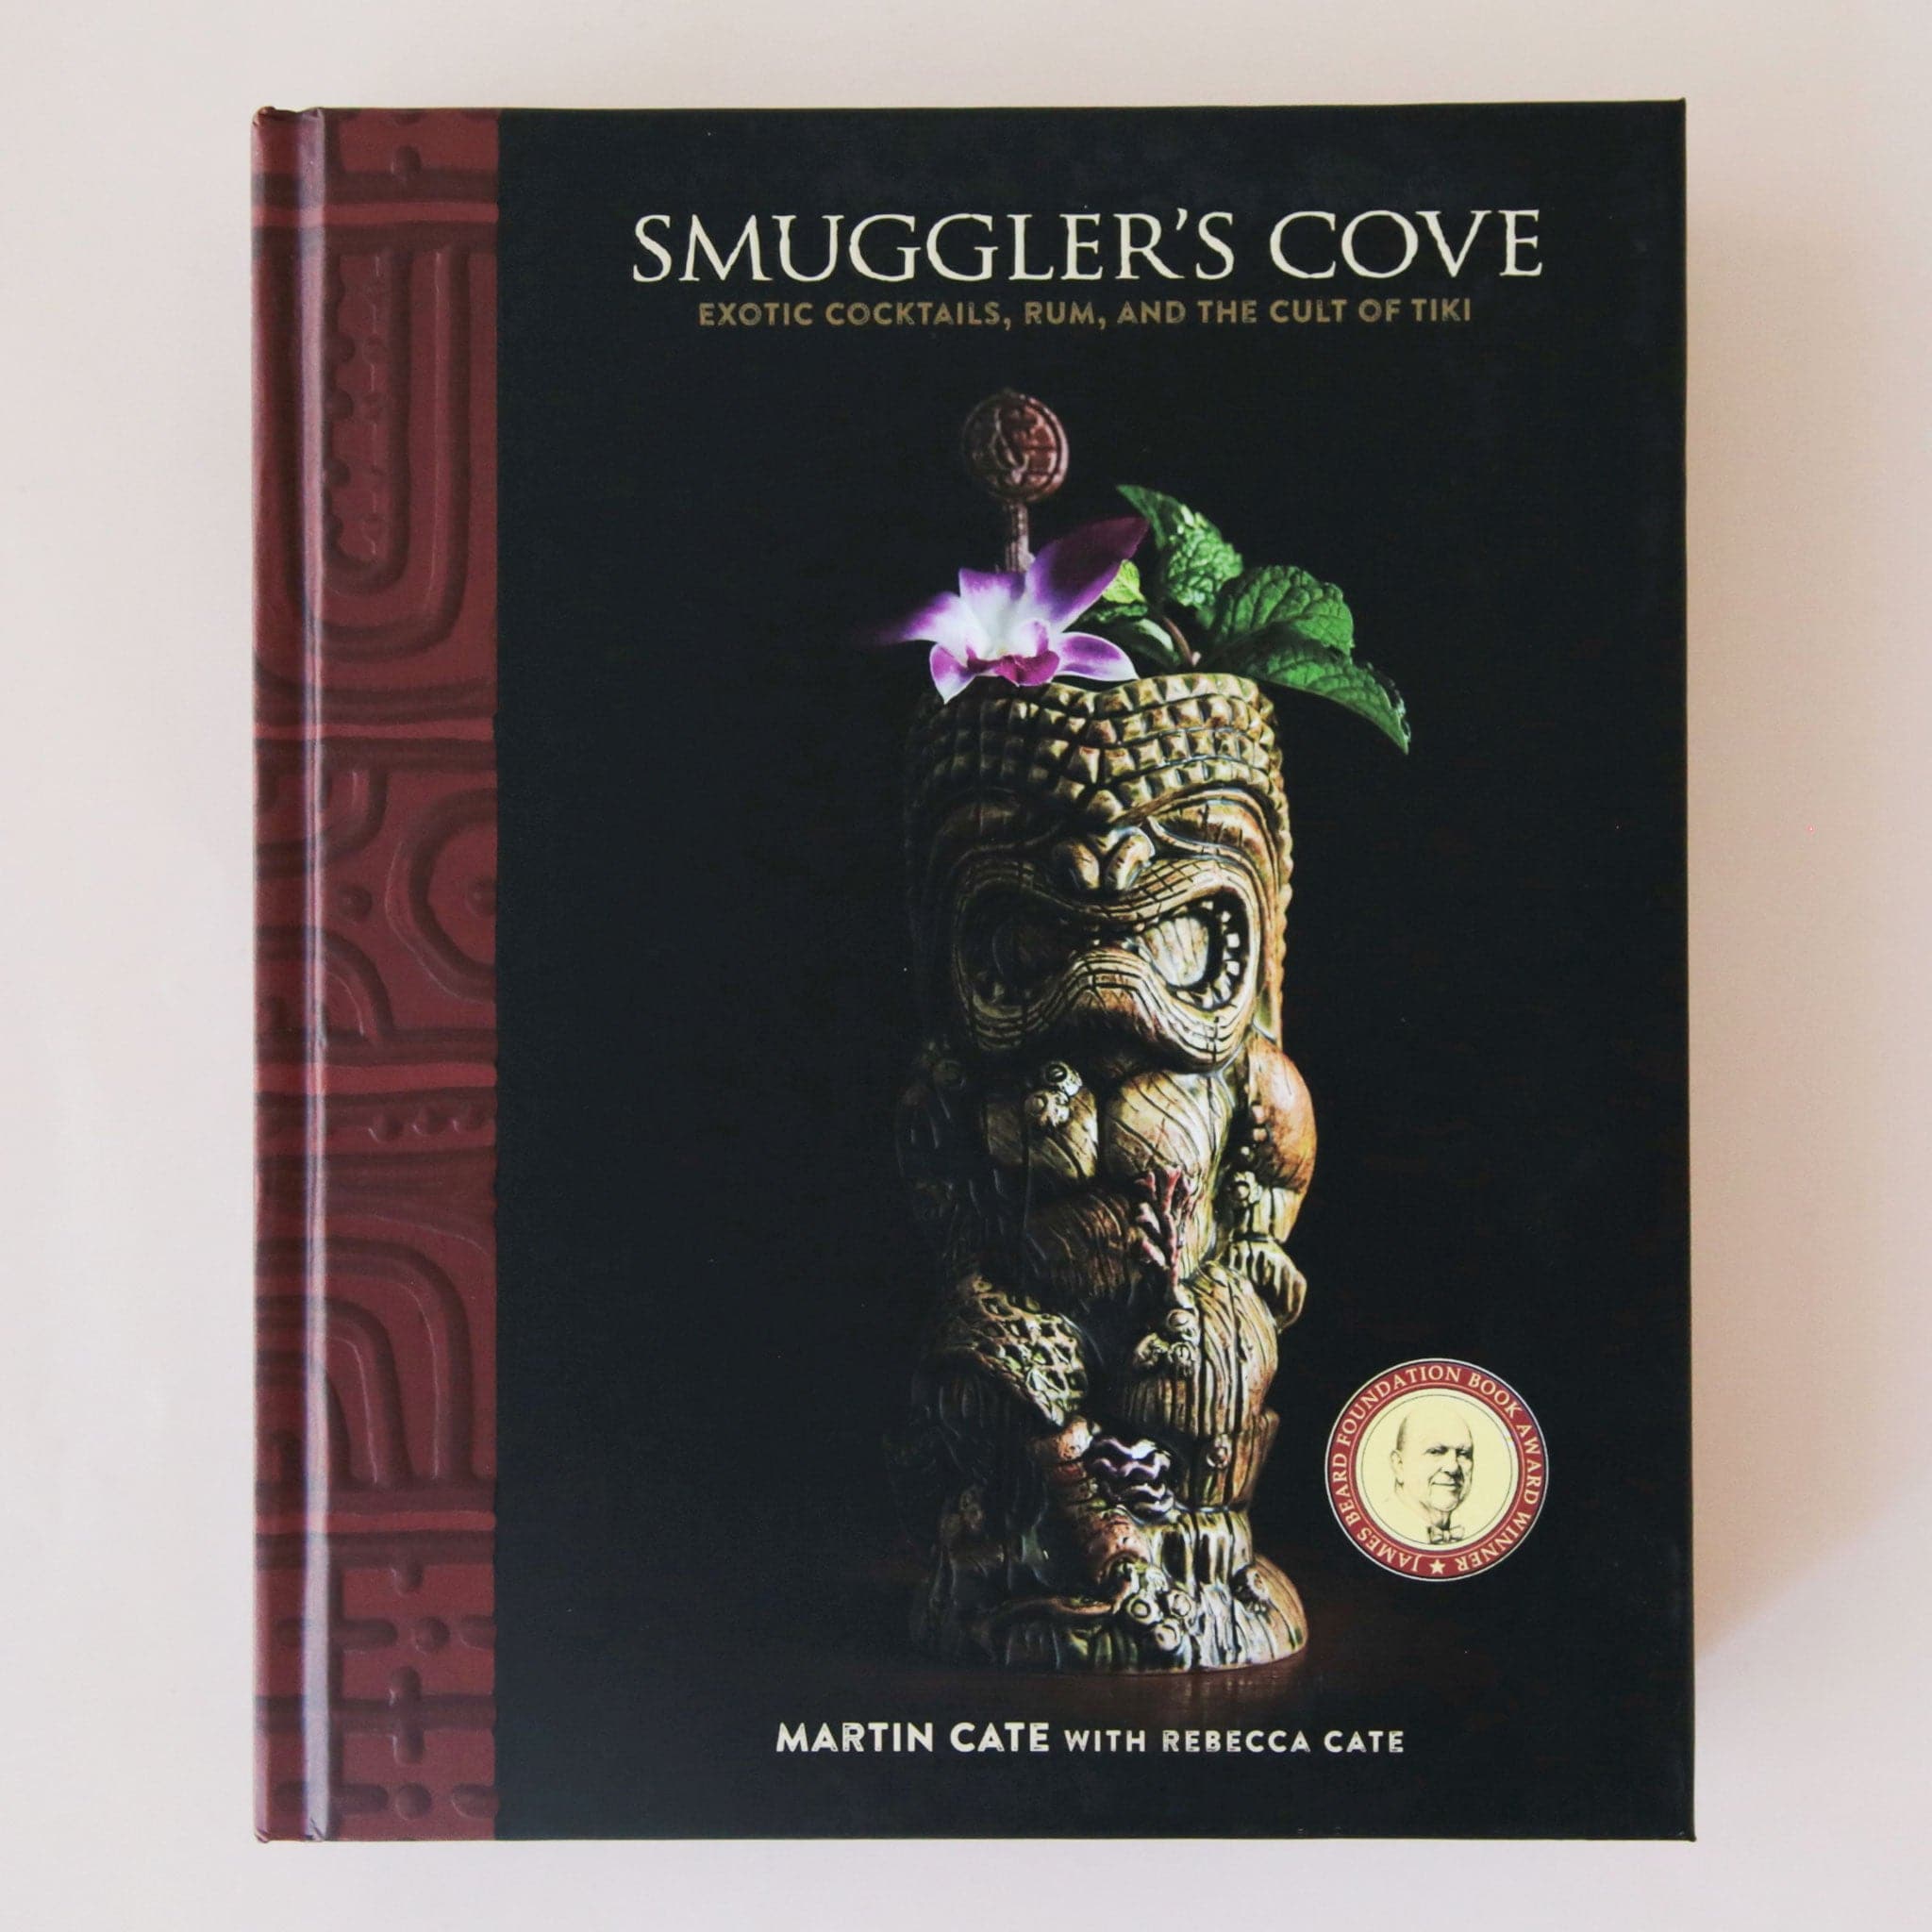  book with a black cover that has a carved tiki on the front along with the title, &quot;Smuggler&#39;s Cove, Exotic Cocktails, Rum and the Cult of Tiki&quot;.